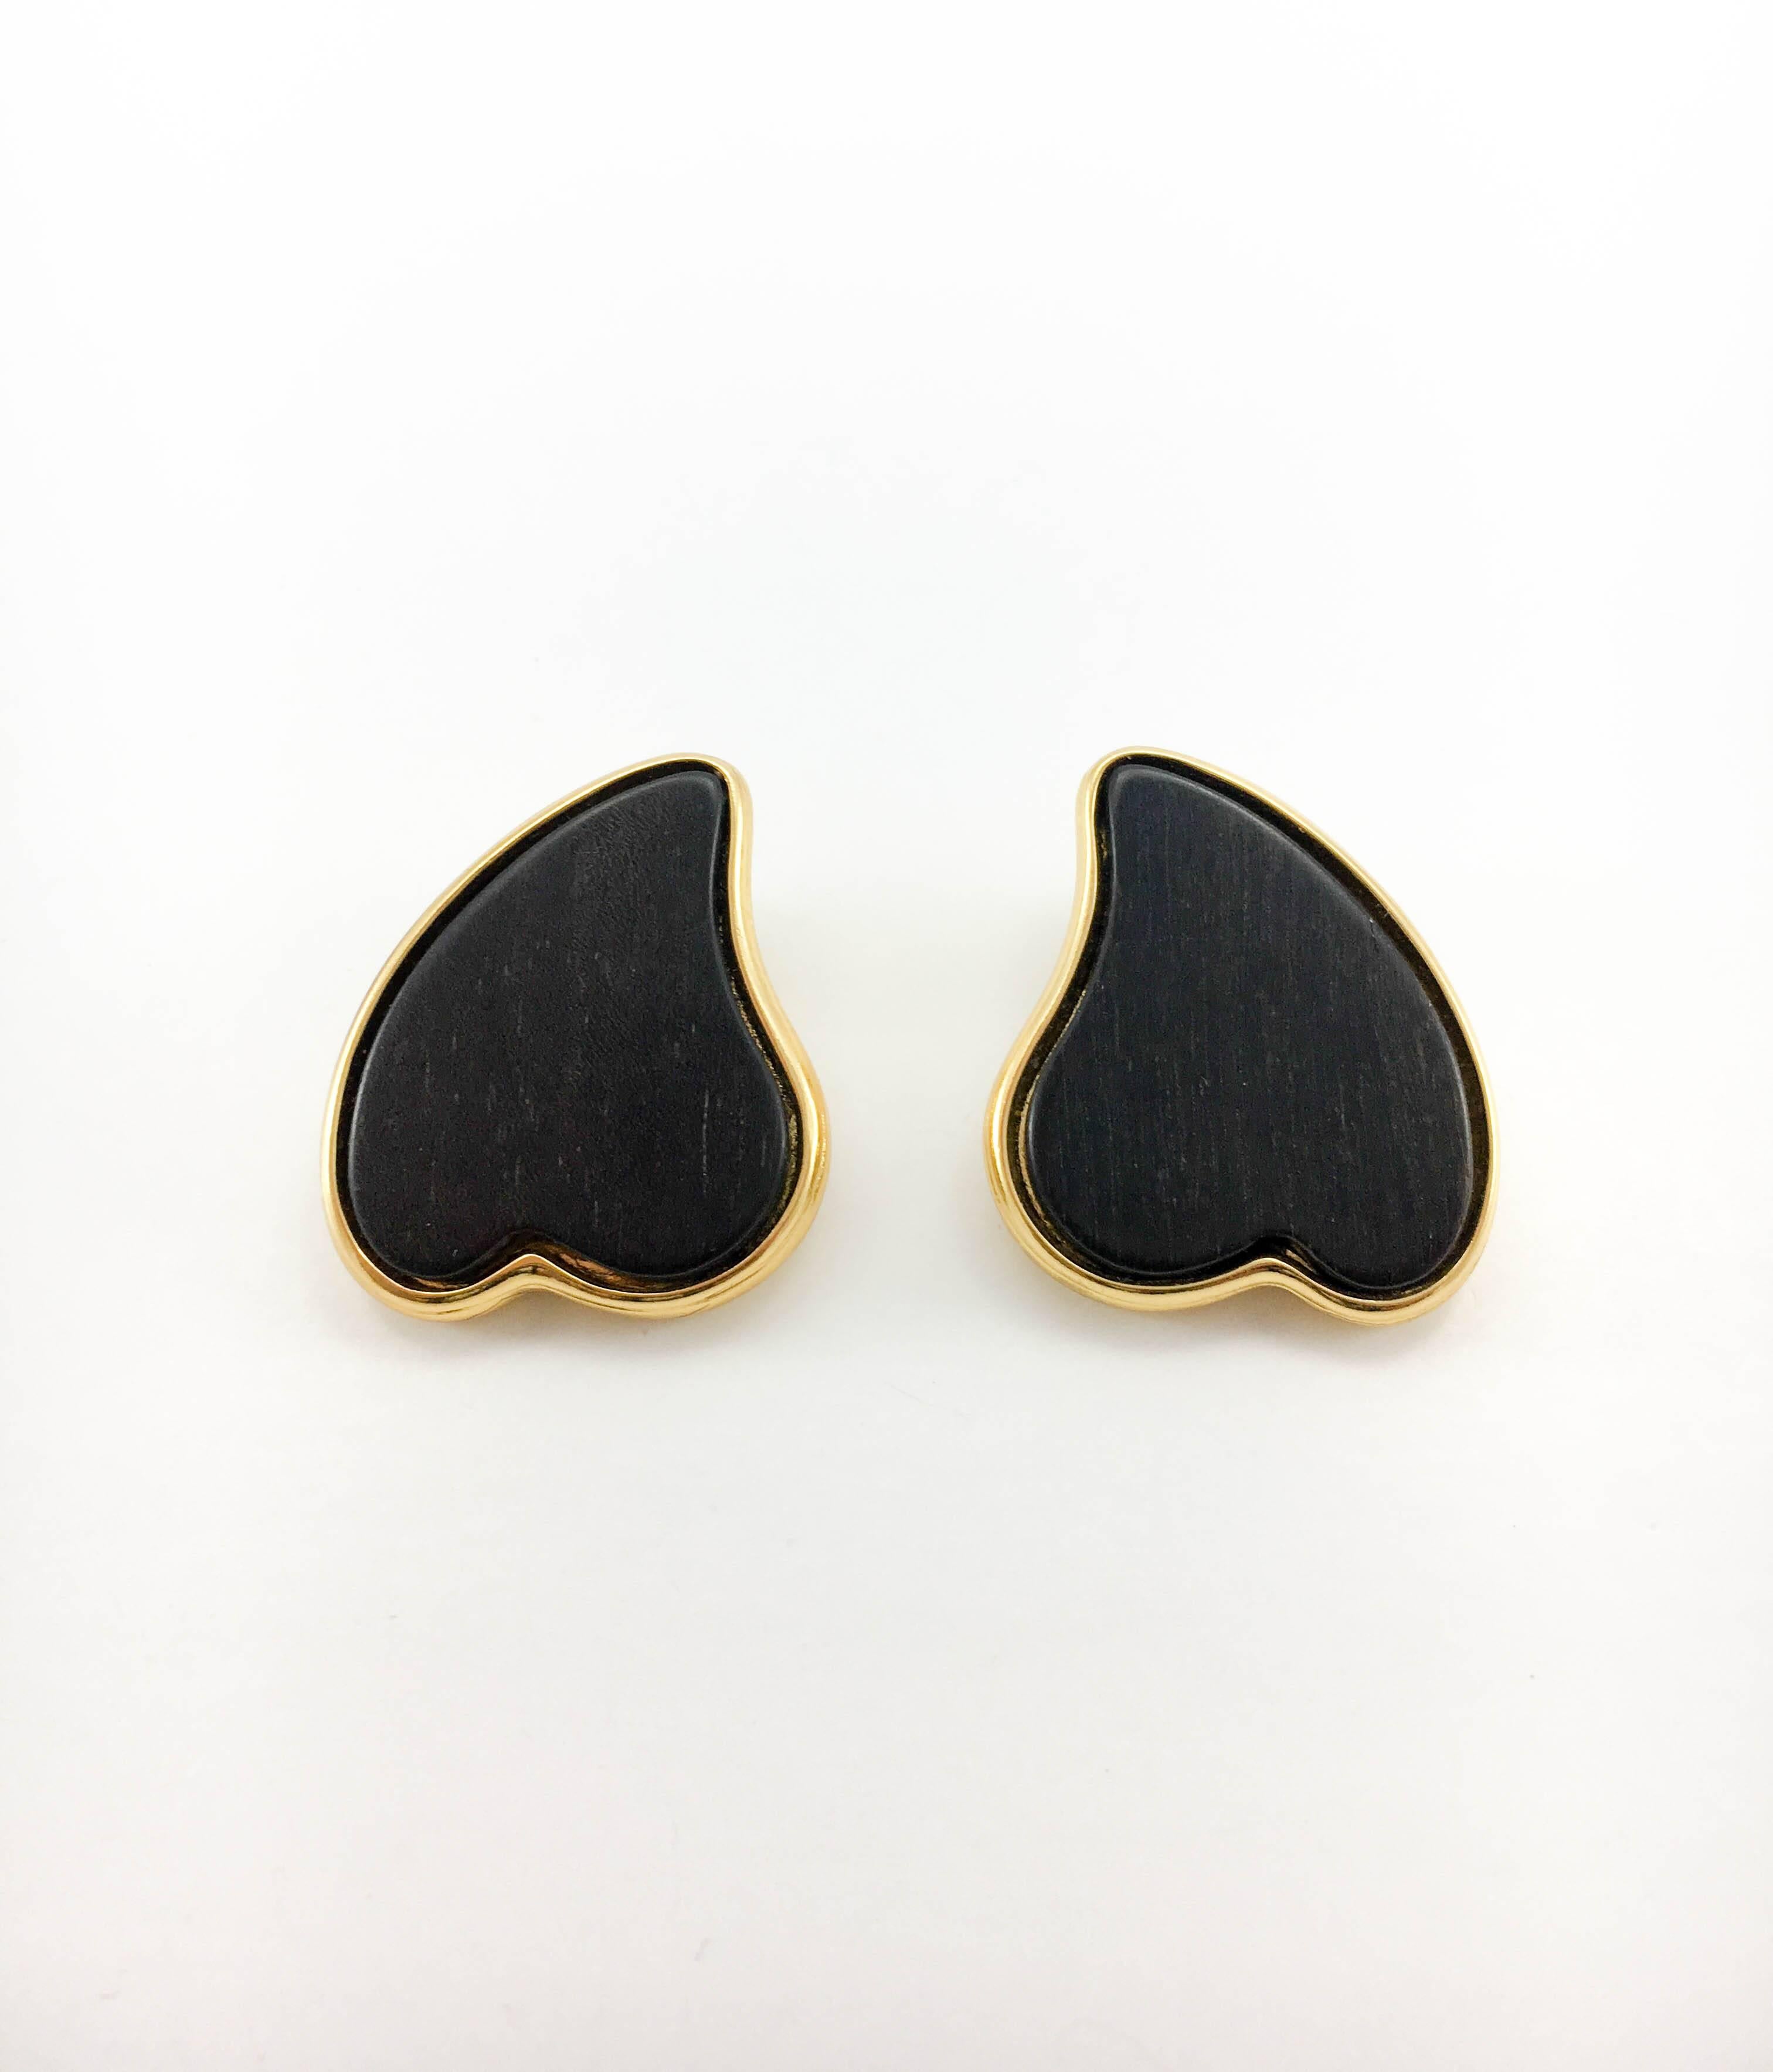 Vintage Yves Saint Laurent Gold-Plated Wood Heart Clip-On Earrings. These stylish earrings by Yves Saint Laurent date back from the 1980’s. Made in gold-plated metal, it features an inset black-wood heart. Signed and numbered (E8) on the back.